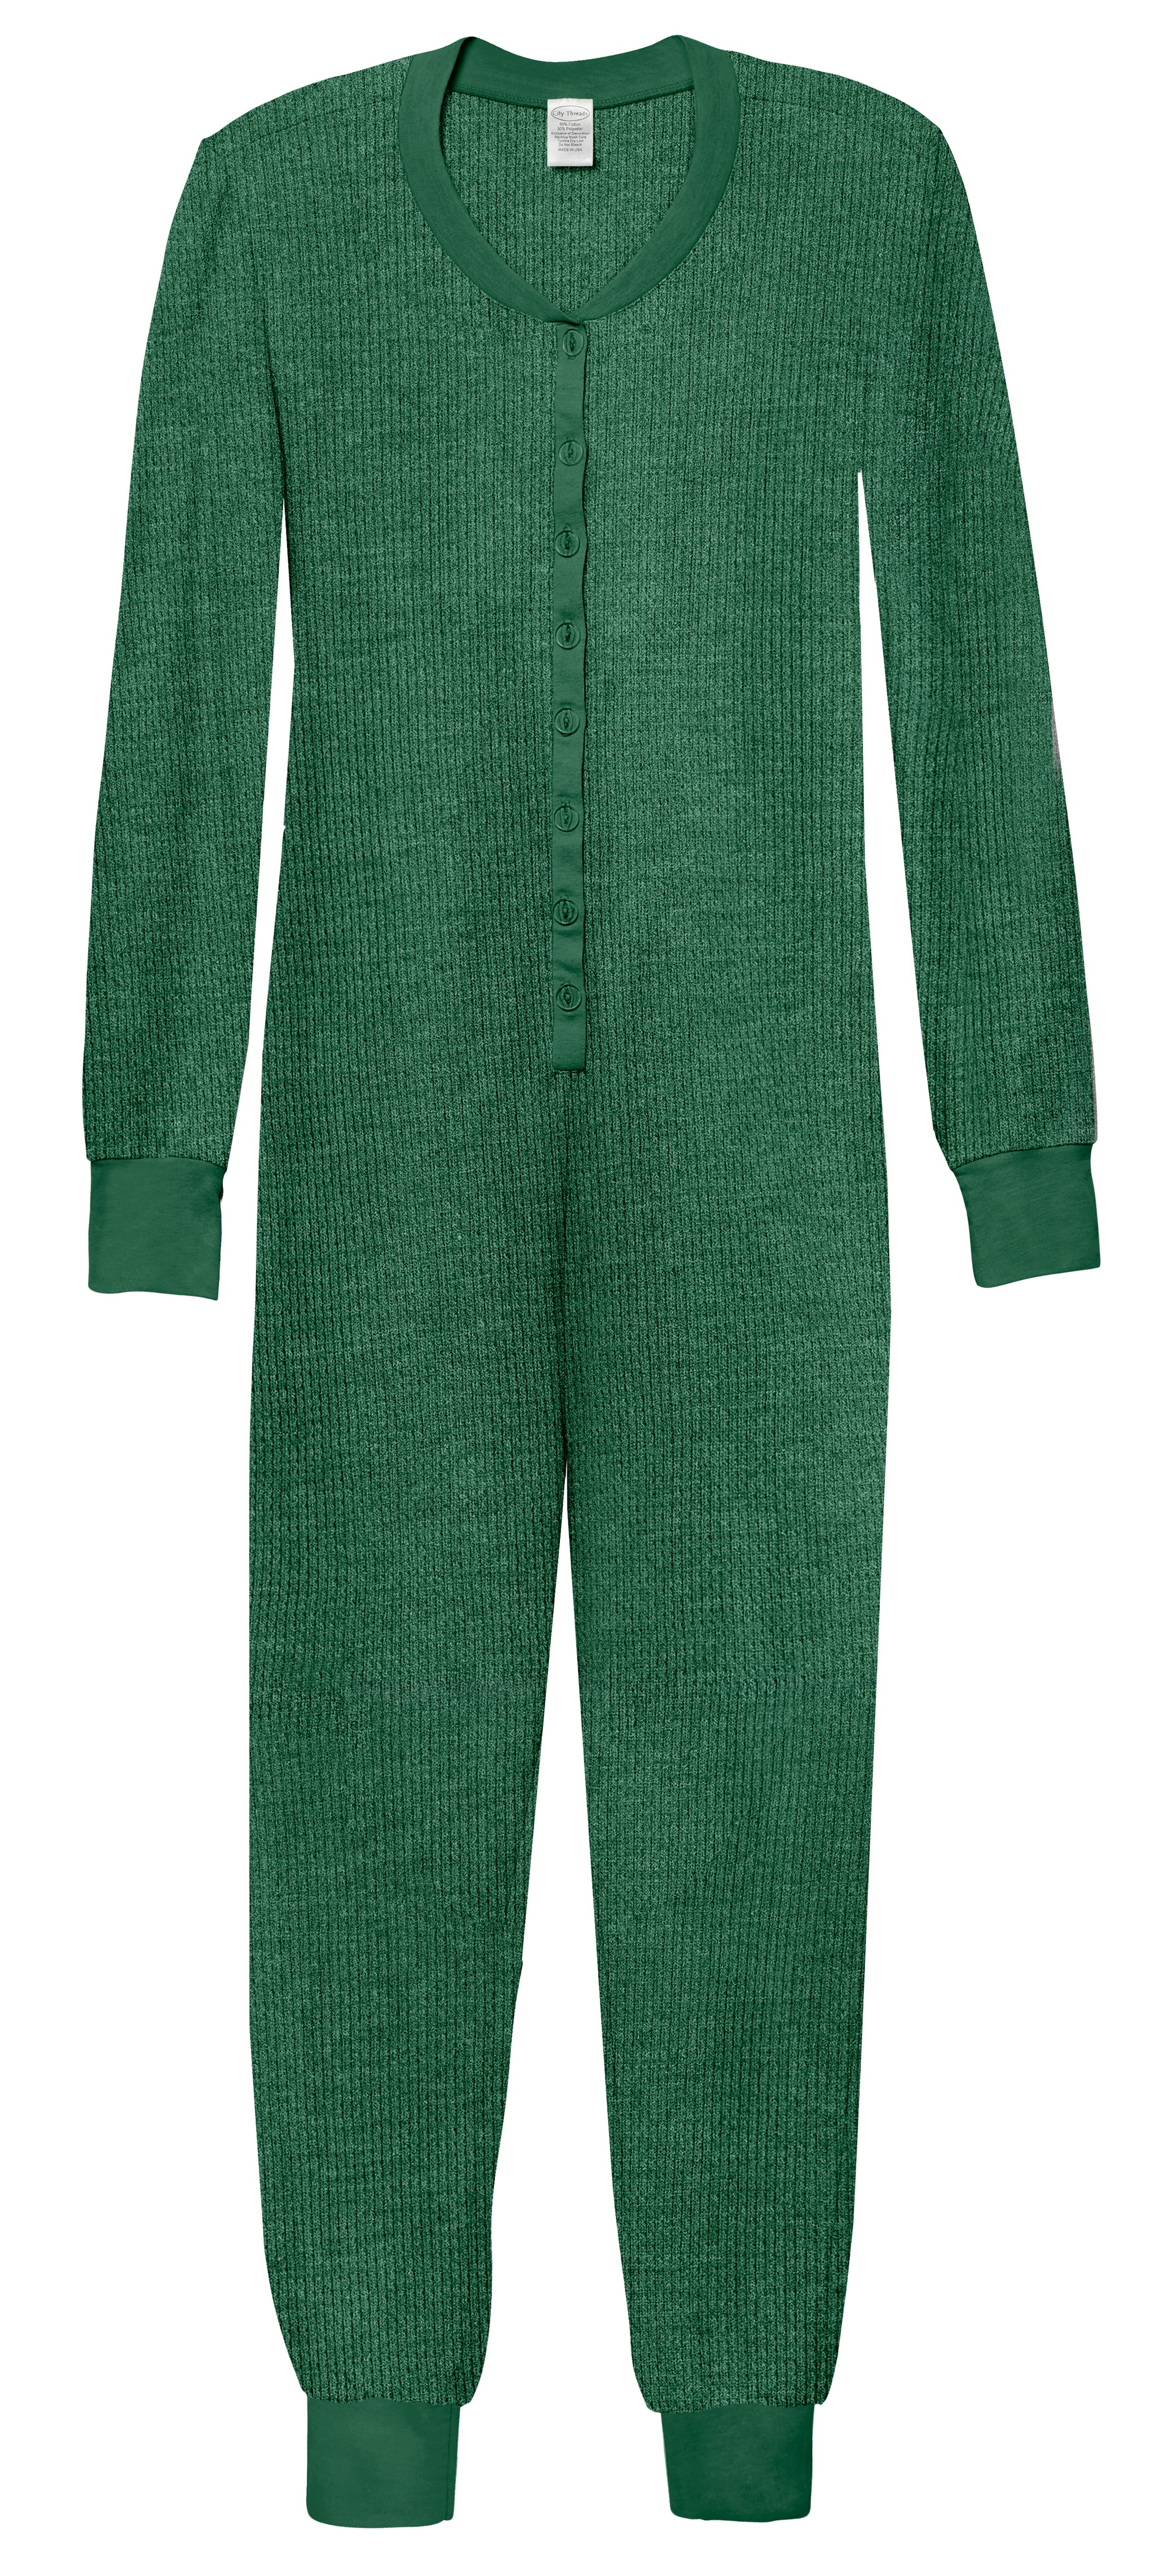 Union suit Pajamas outfit sewing pattern for 18